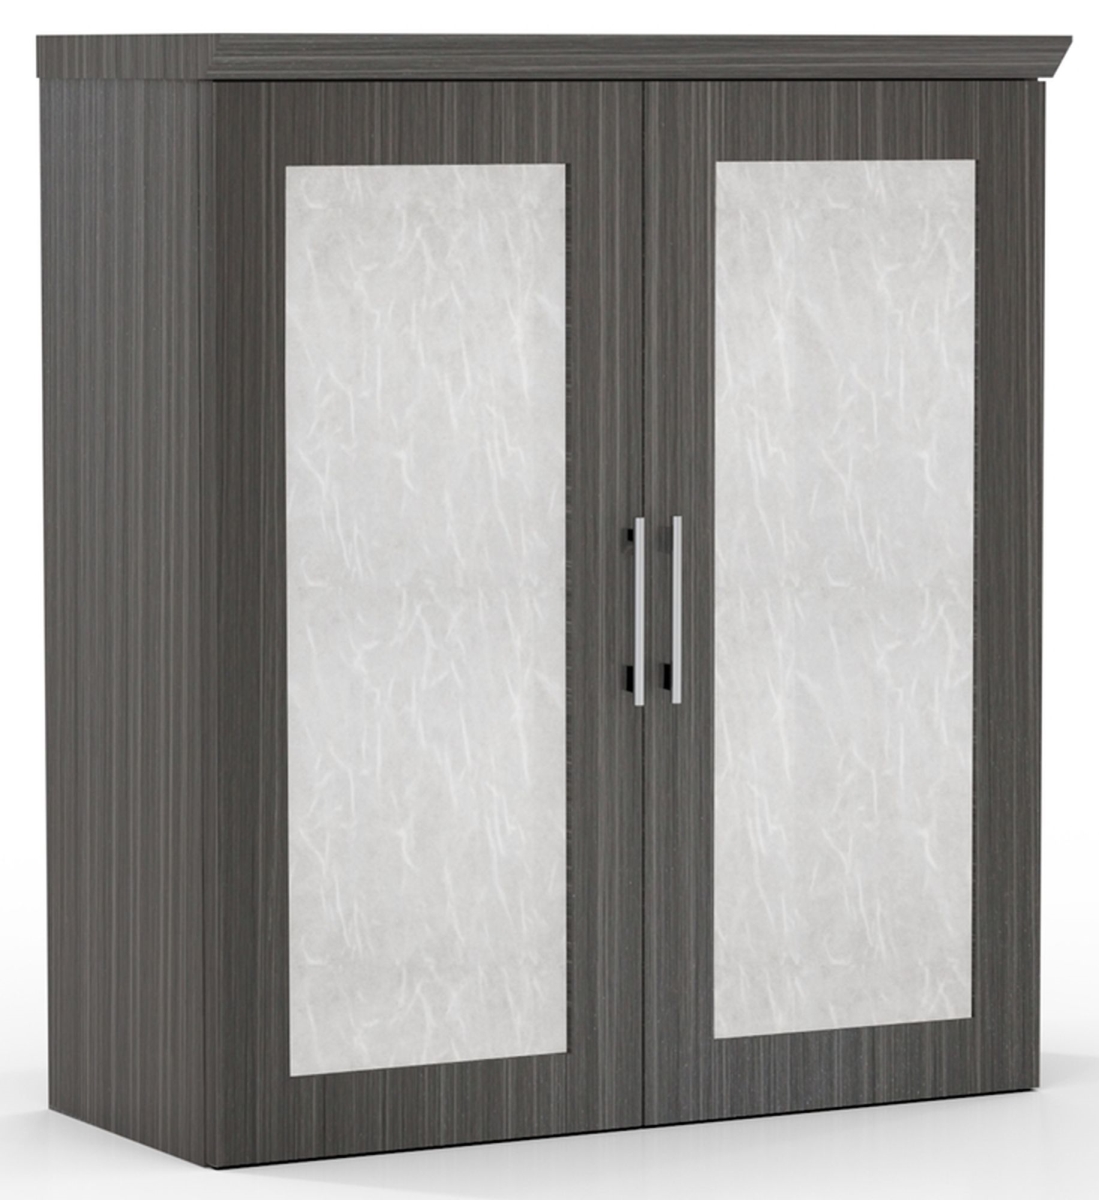 Stscadtdw Sterling Storage Cabinet With Acrylic Doors - Textured Driftwood - 41.62 X 36 X 16.5 In.